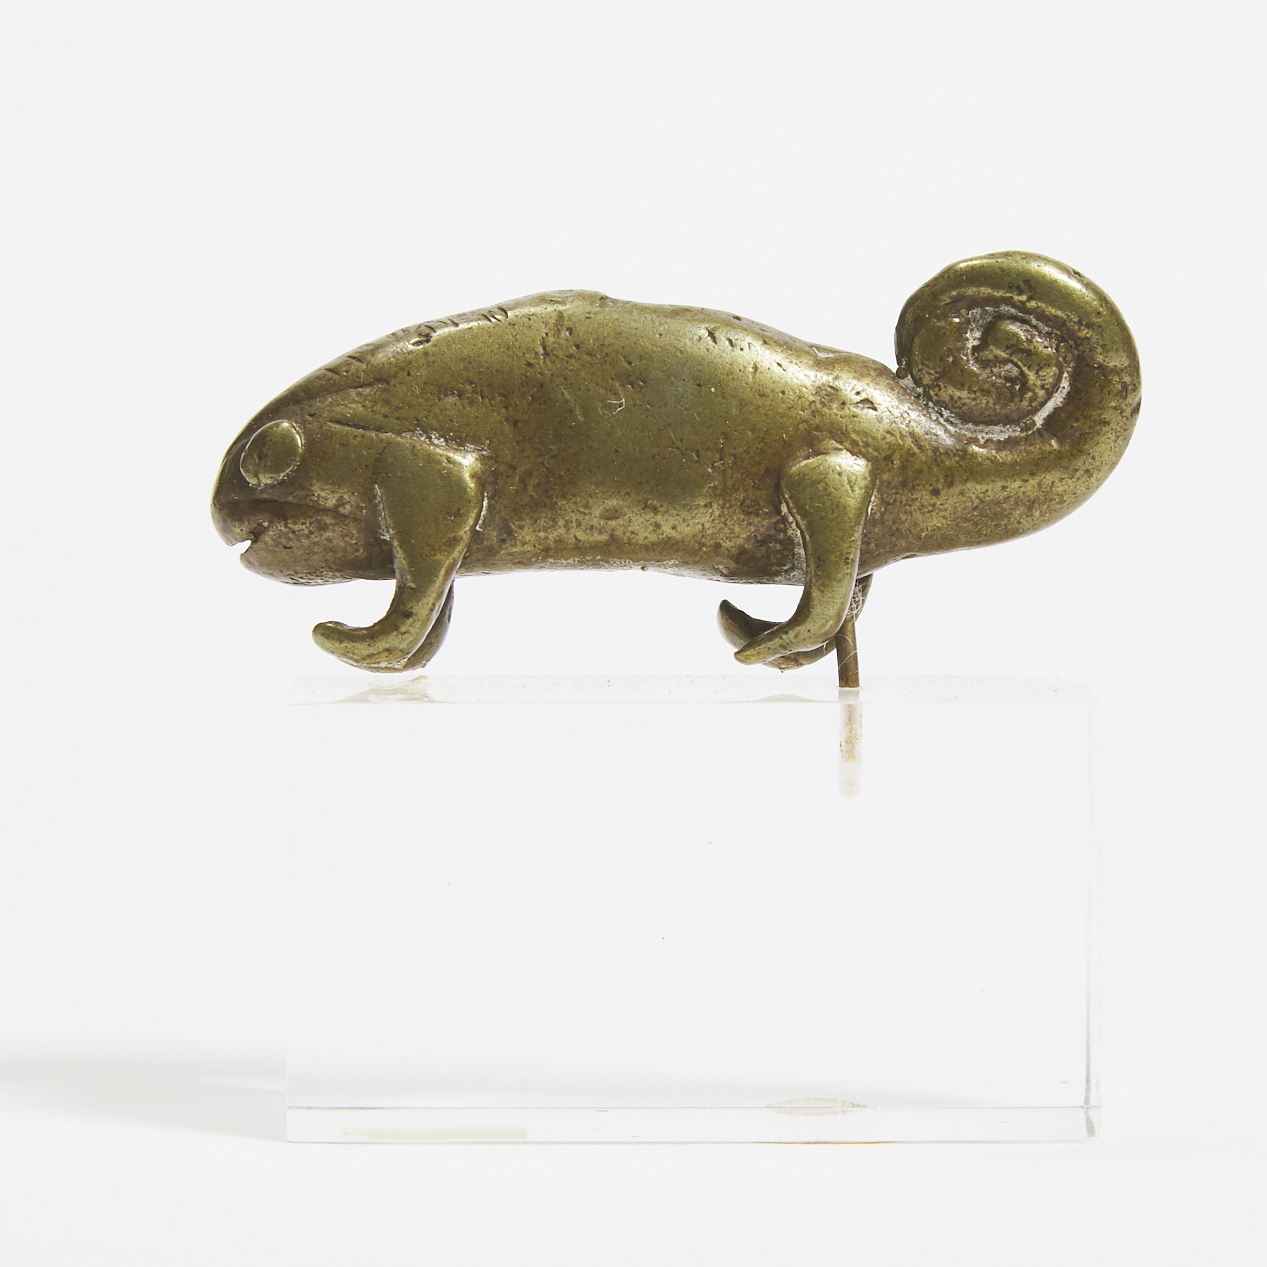 Akan/Ashanit Brass Chameleon Form Goldweight, Ghana, West Africa, late 19th to early 20th century